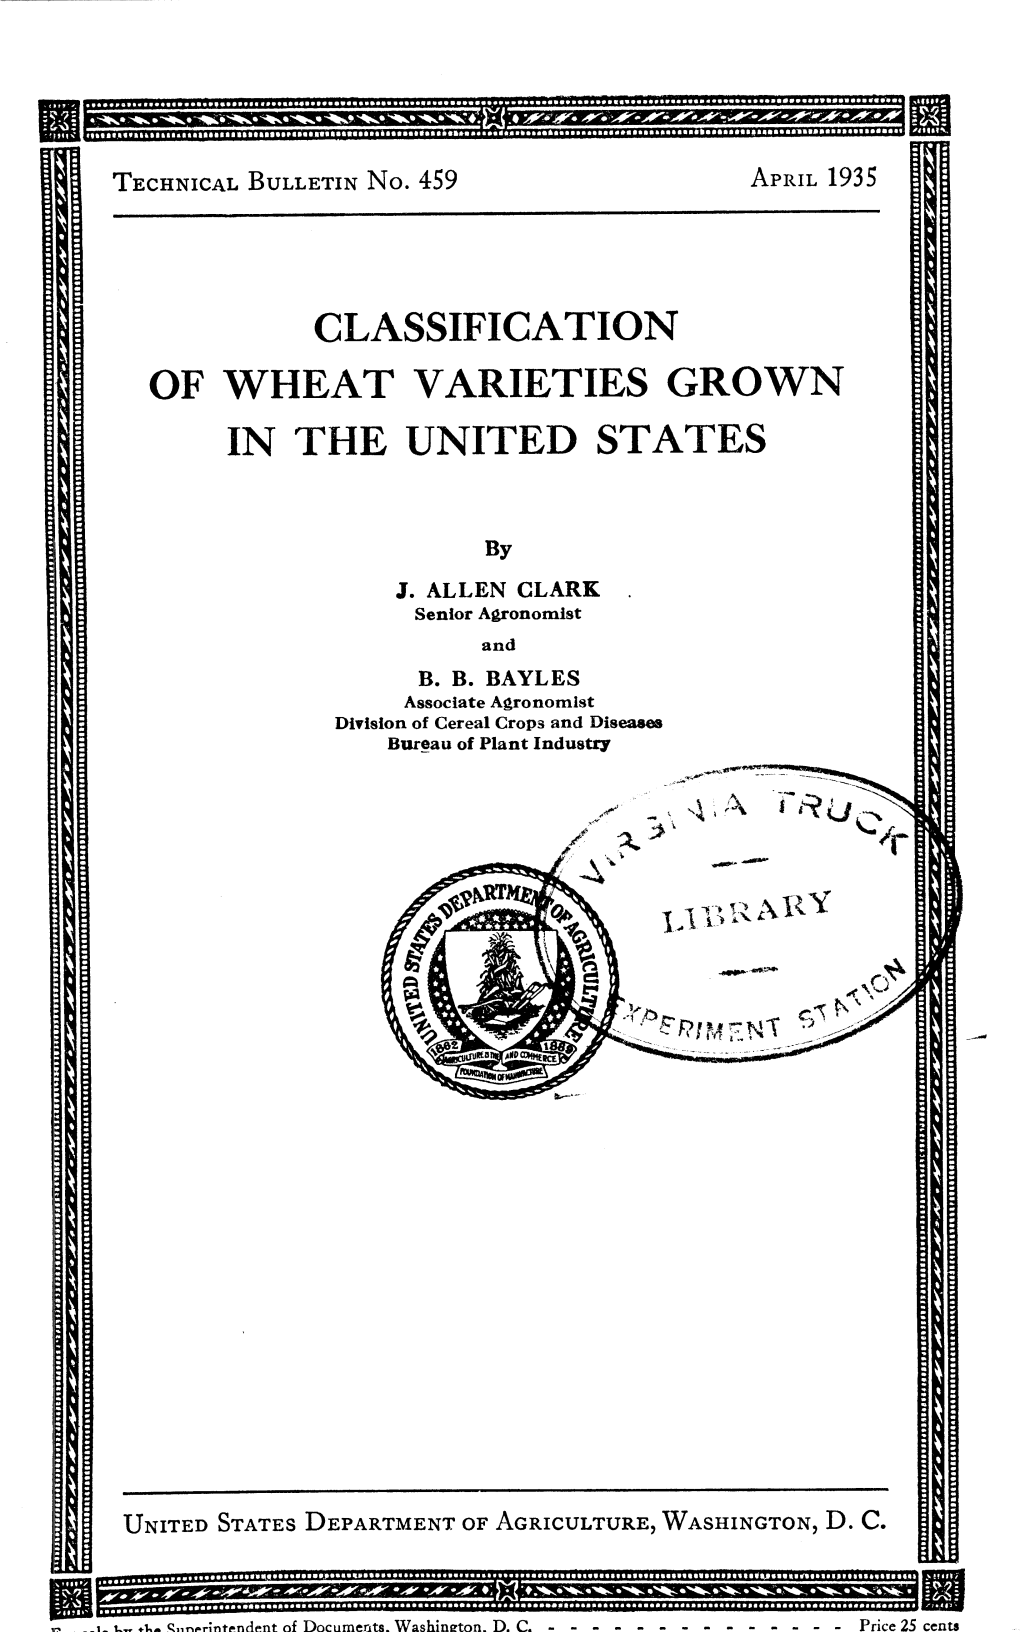 Classification of Wheat Varieties Grown in the United States